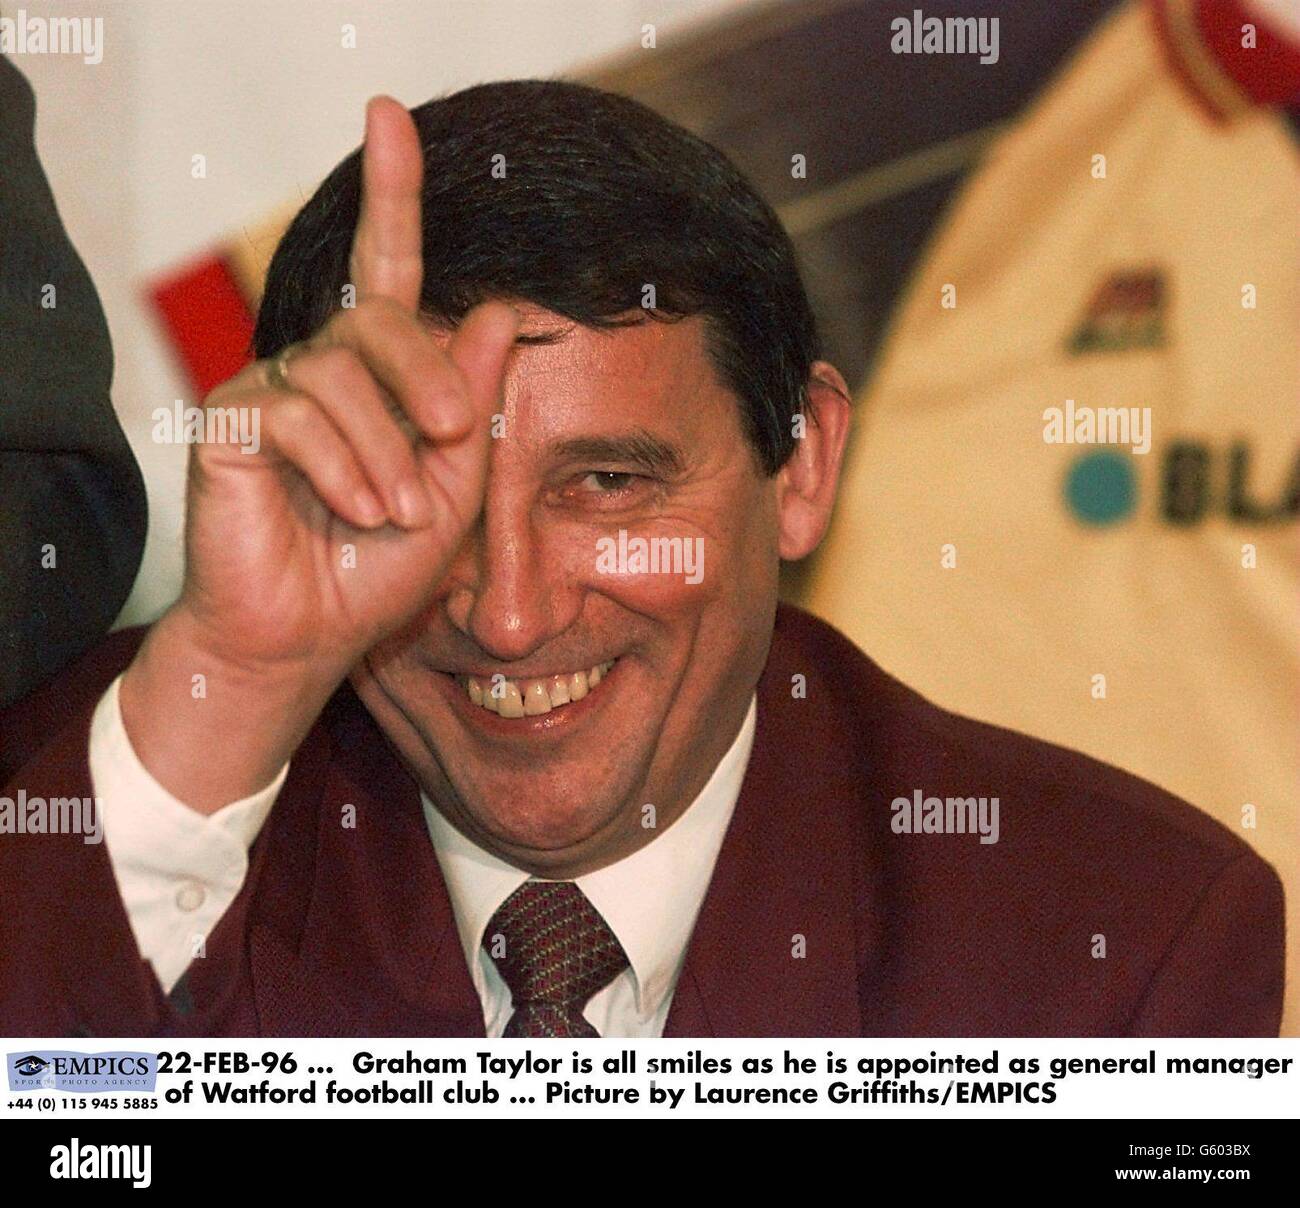 22-FEB-96. Graham Taylor is all smiles as he is appointed as General Manager of Watford Football Club. Picture by Laurence Griffiths/EMPICS Stock Photo